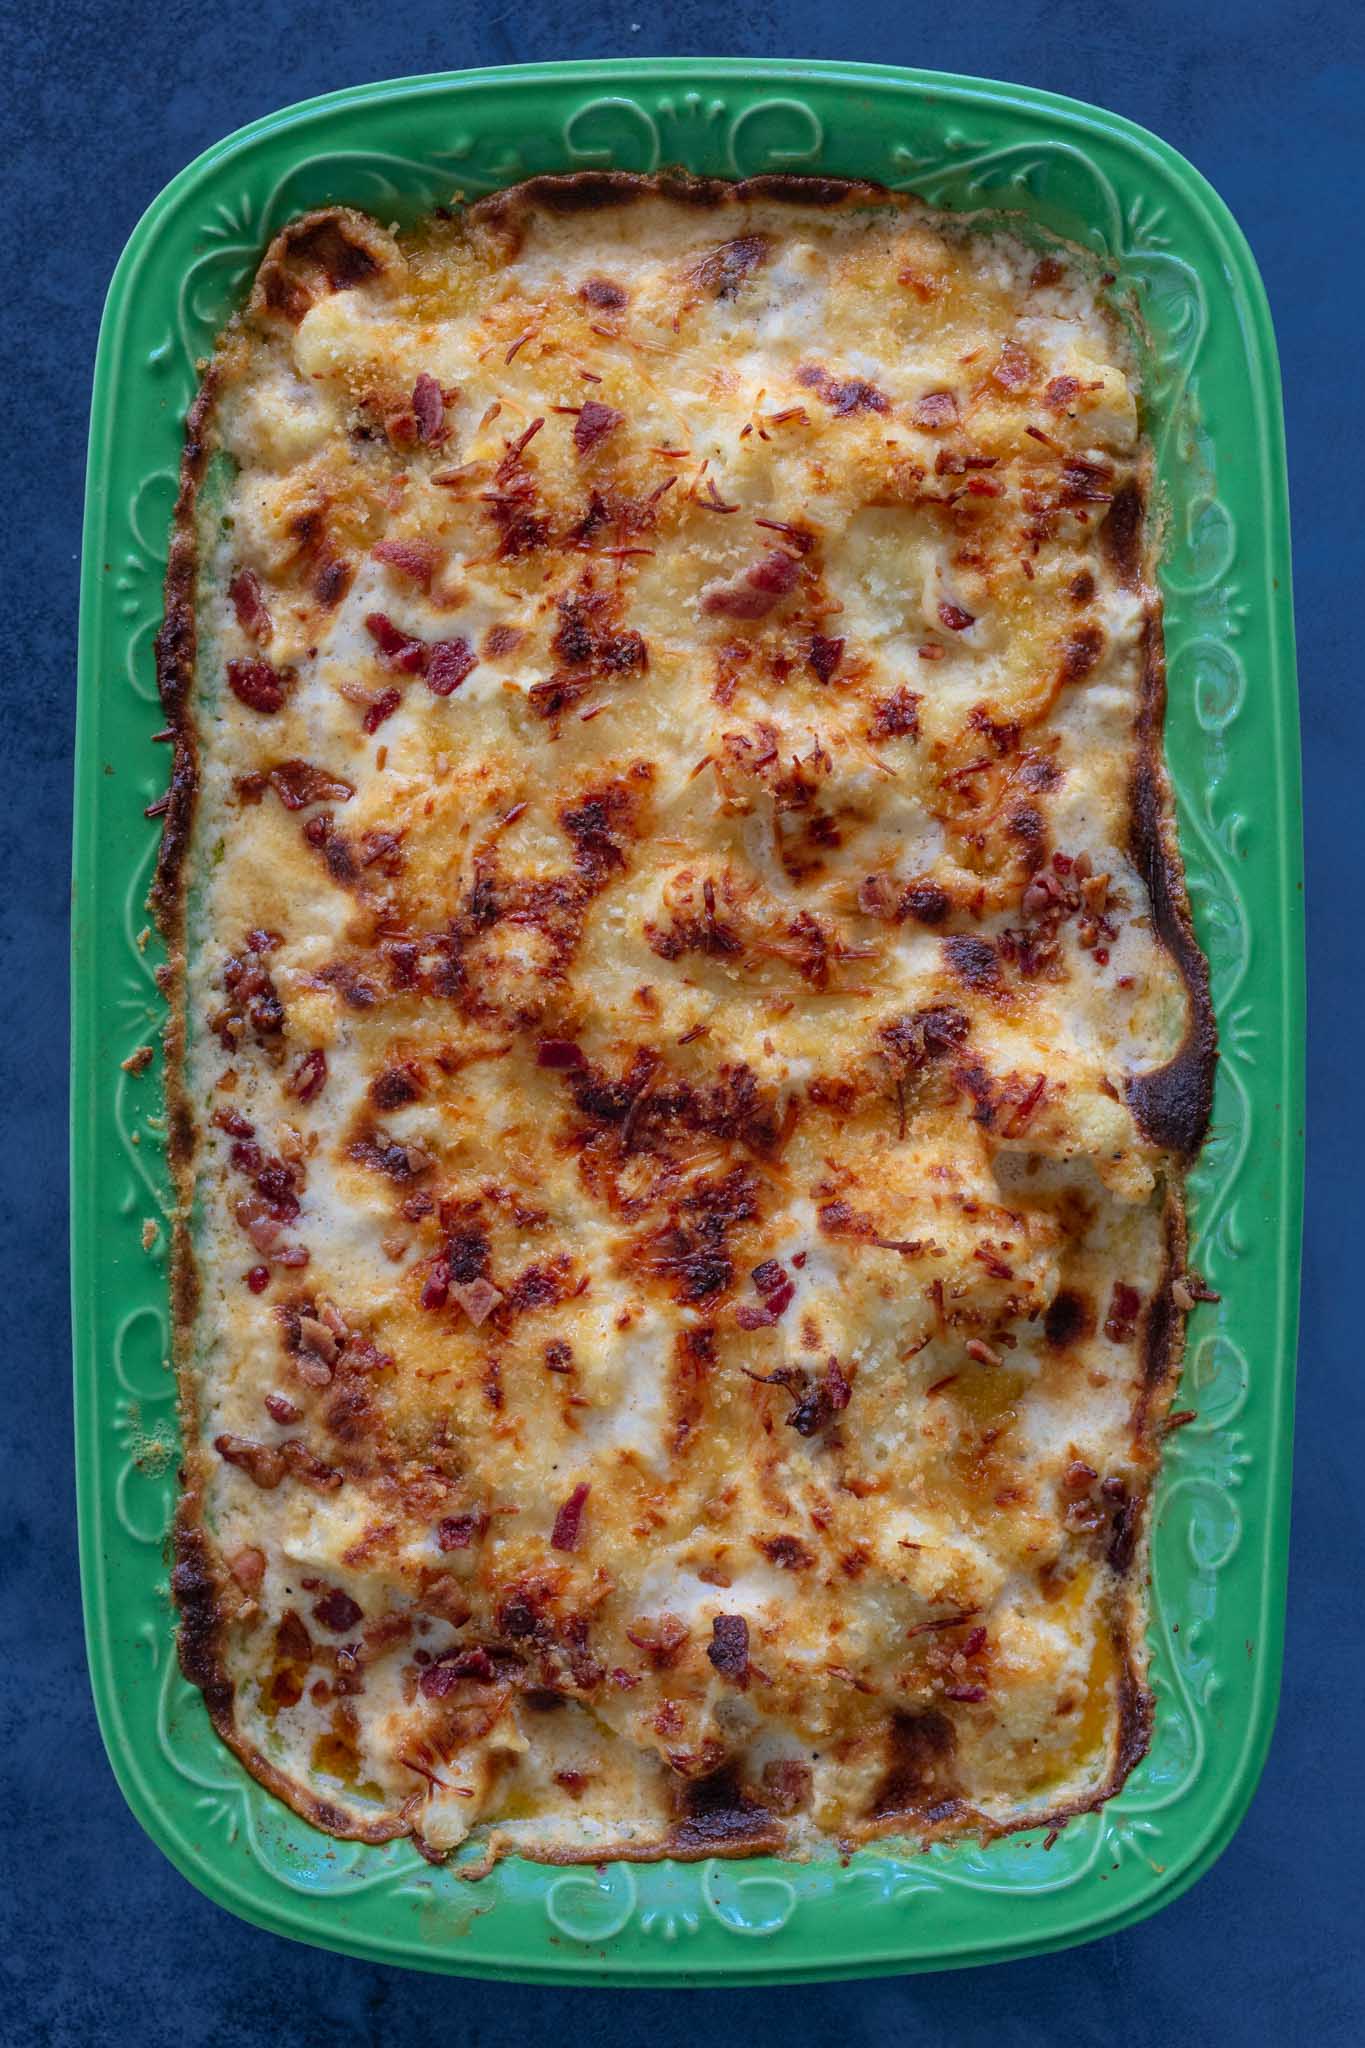 Cheesy casserole right out of the oven